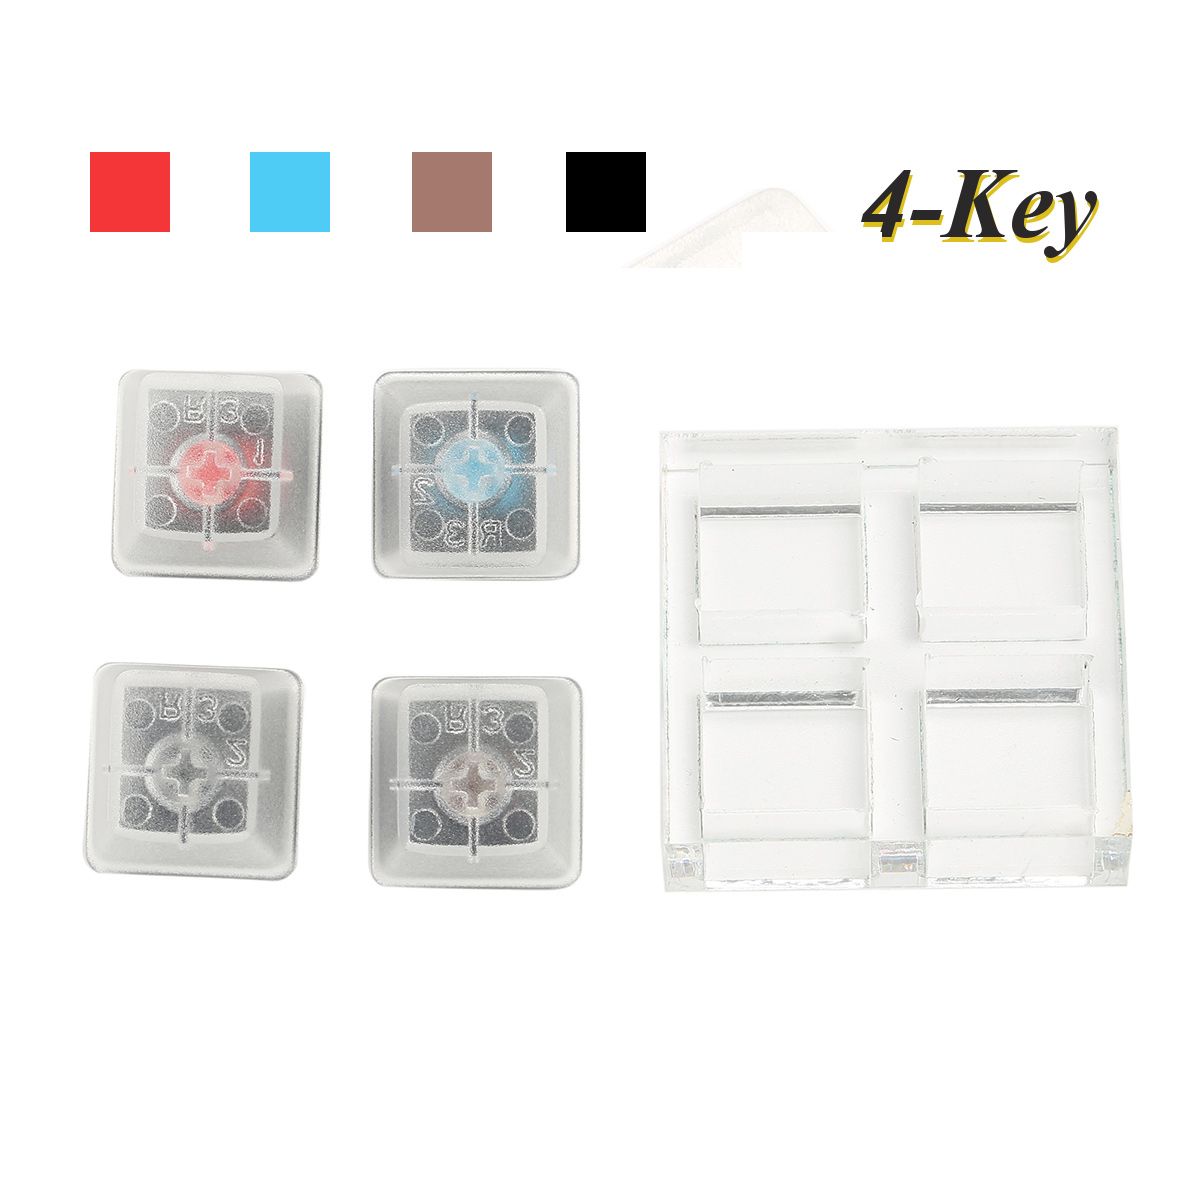 4-Mechanical-Keyboards-Switch-Tester-Kit-Keycaps-Switches-Sampler-For-Cherry-MX-1127151